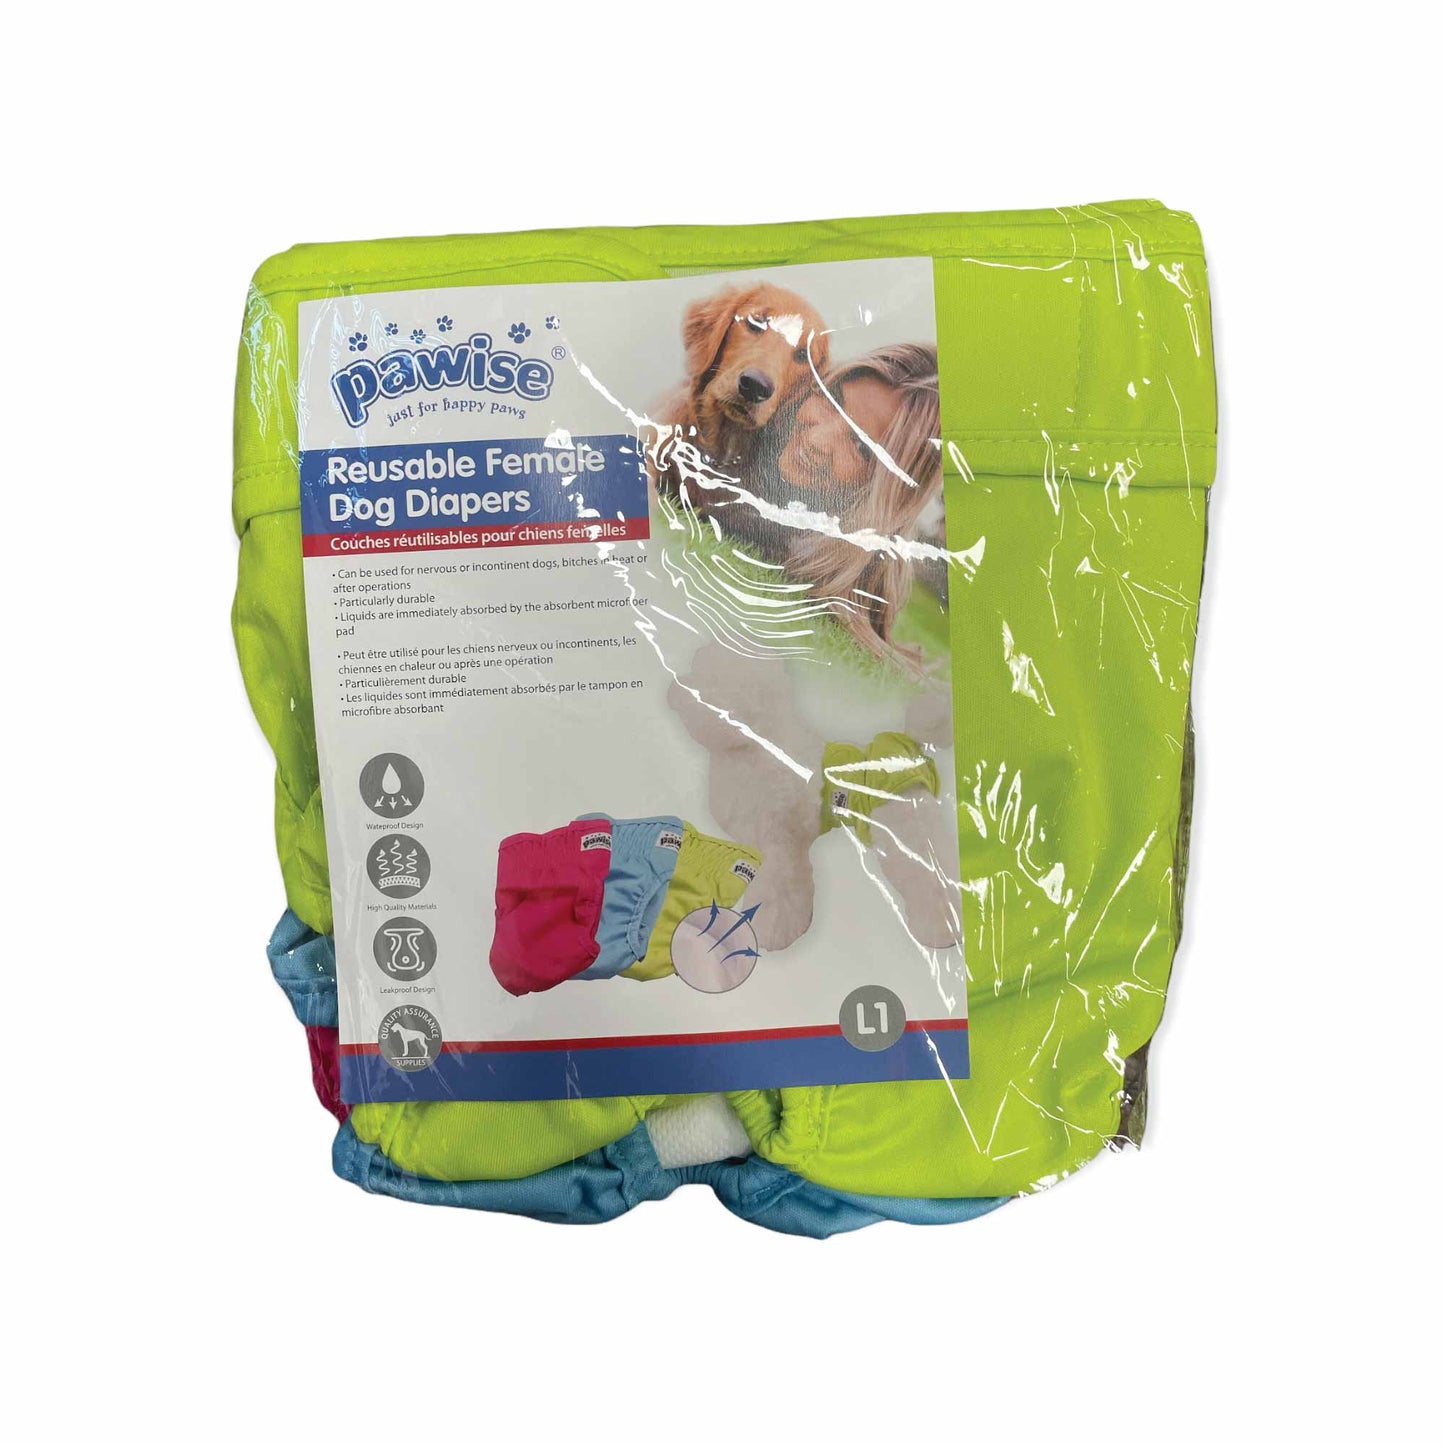 3 Pck Reusable Female Dog Diapers Puppy Nappy Eco Washable Period Incontinence Heat